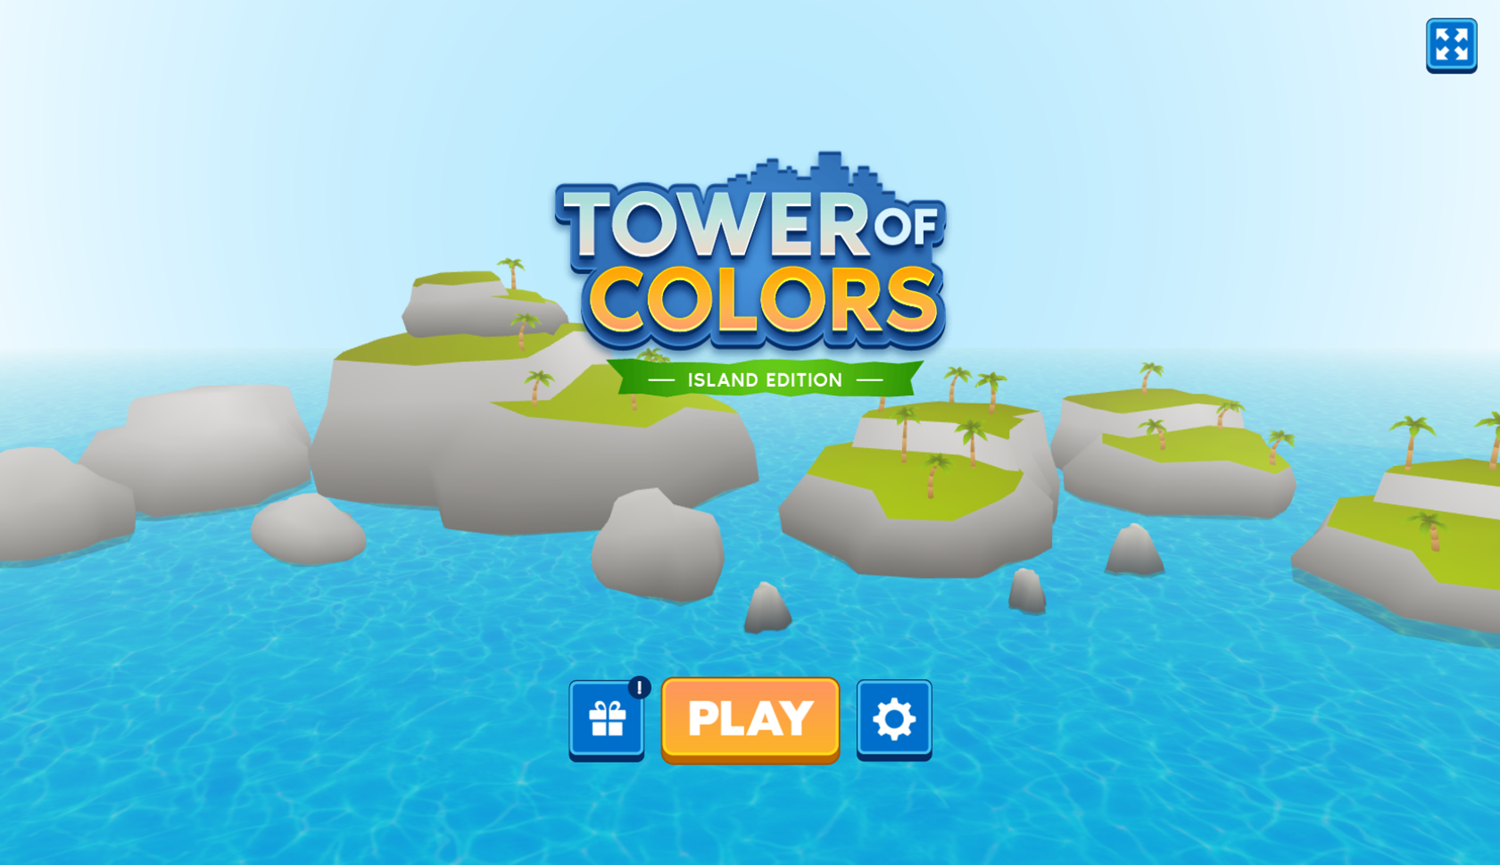 Tower of Colors Island Edition Game Welcome Screen Screenshot.